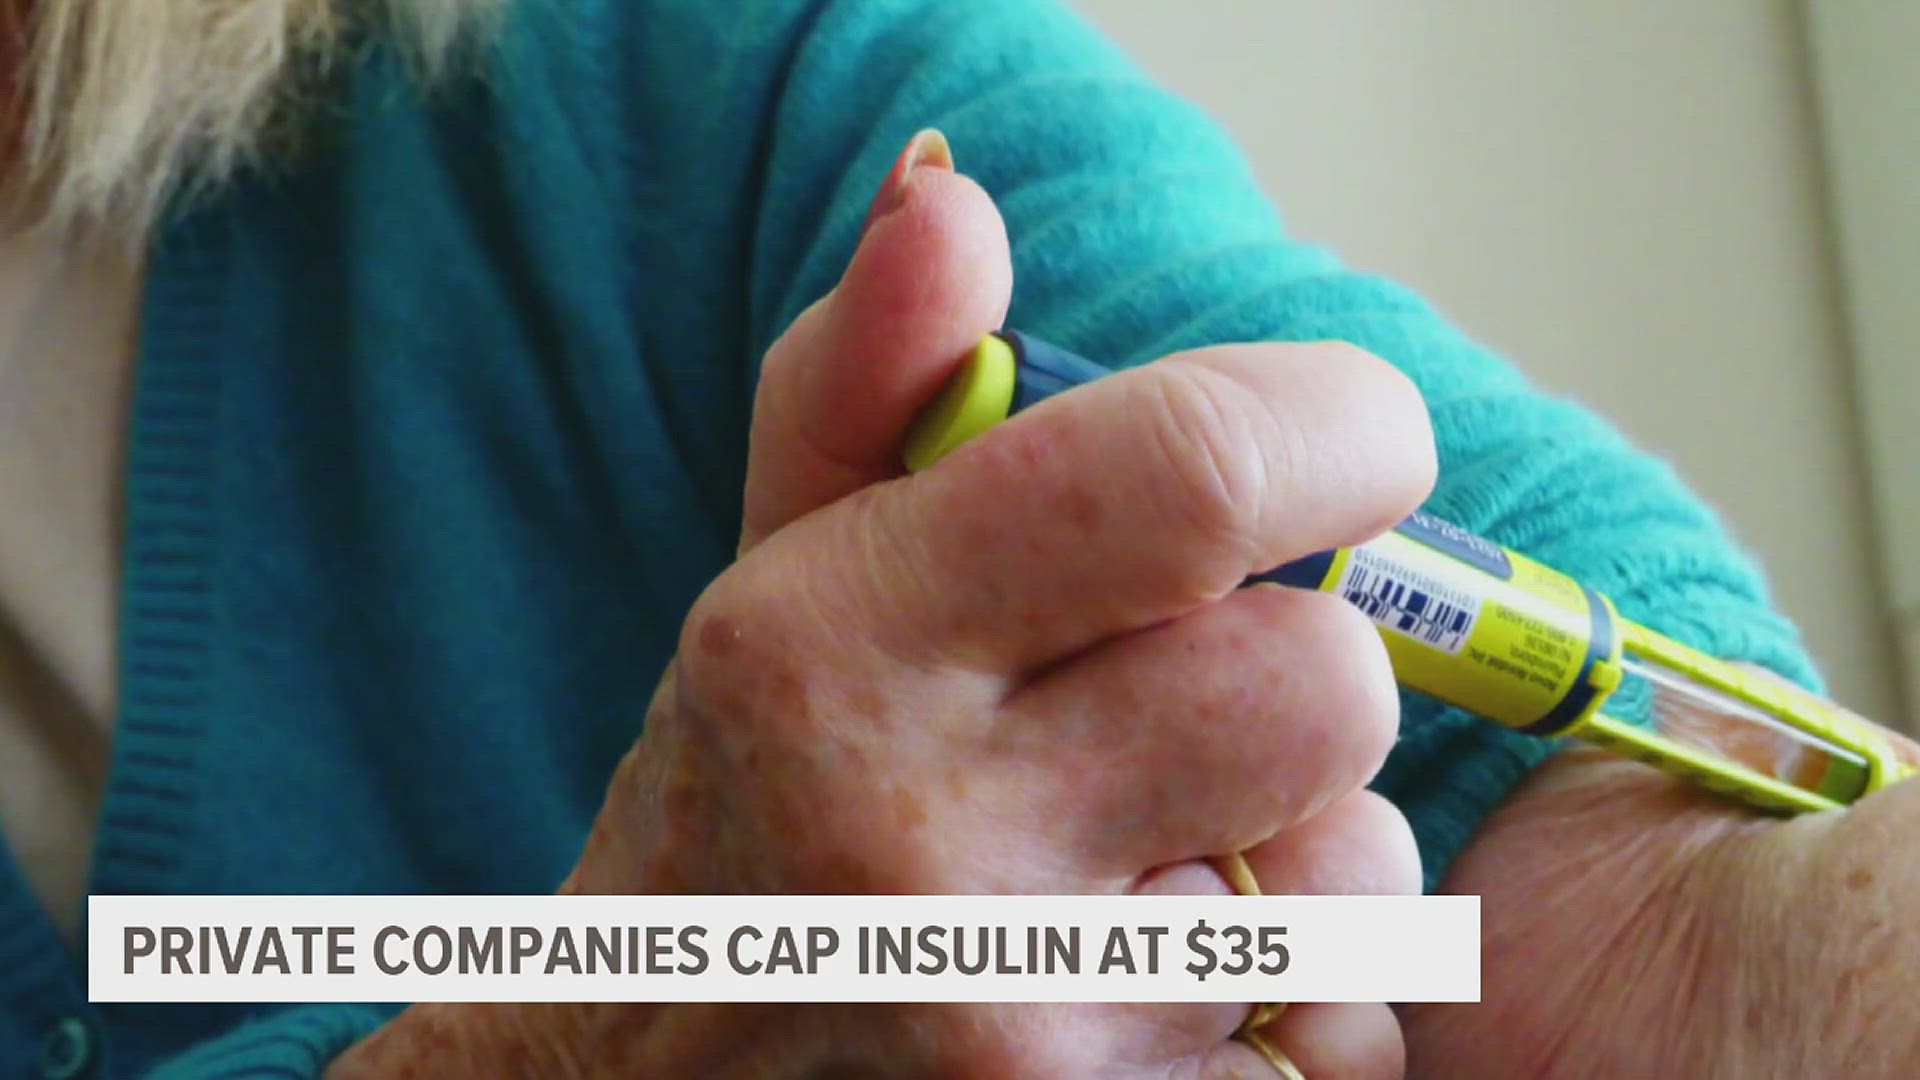 Earlier this year, President Biden capped insulin costs for seniors on Medicare at $35. Now, the private sector is following suit.